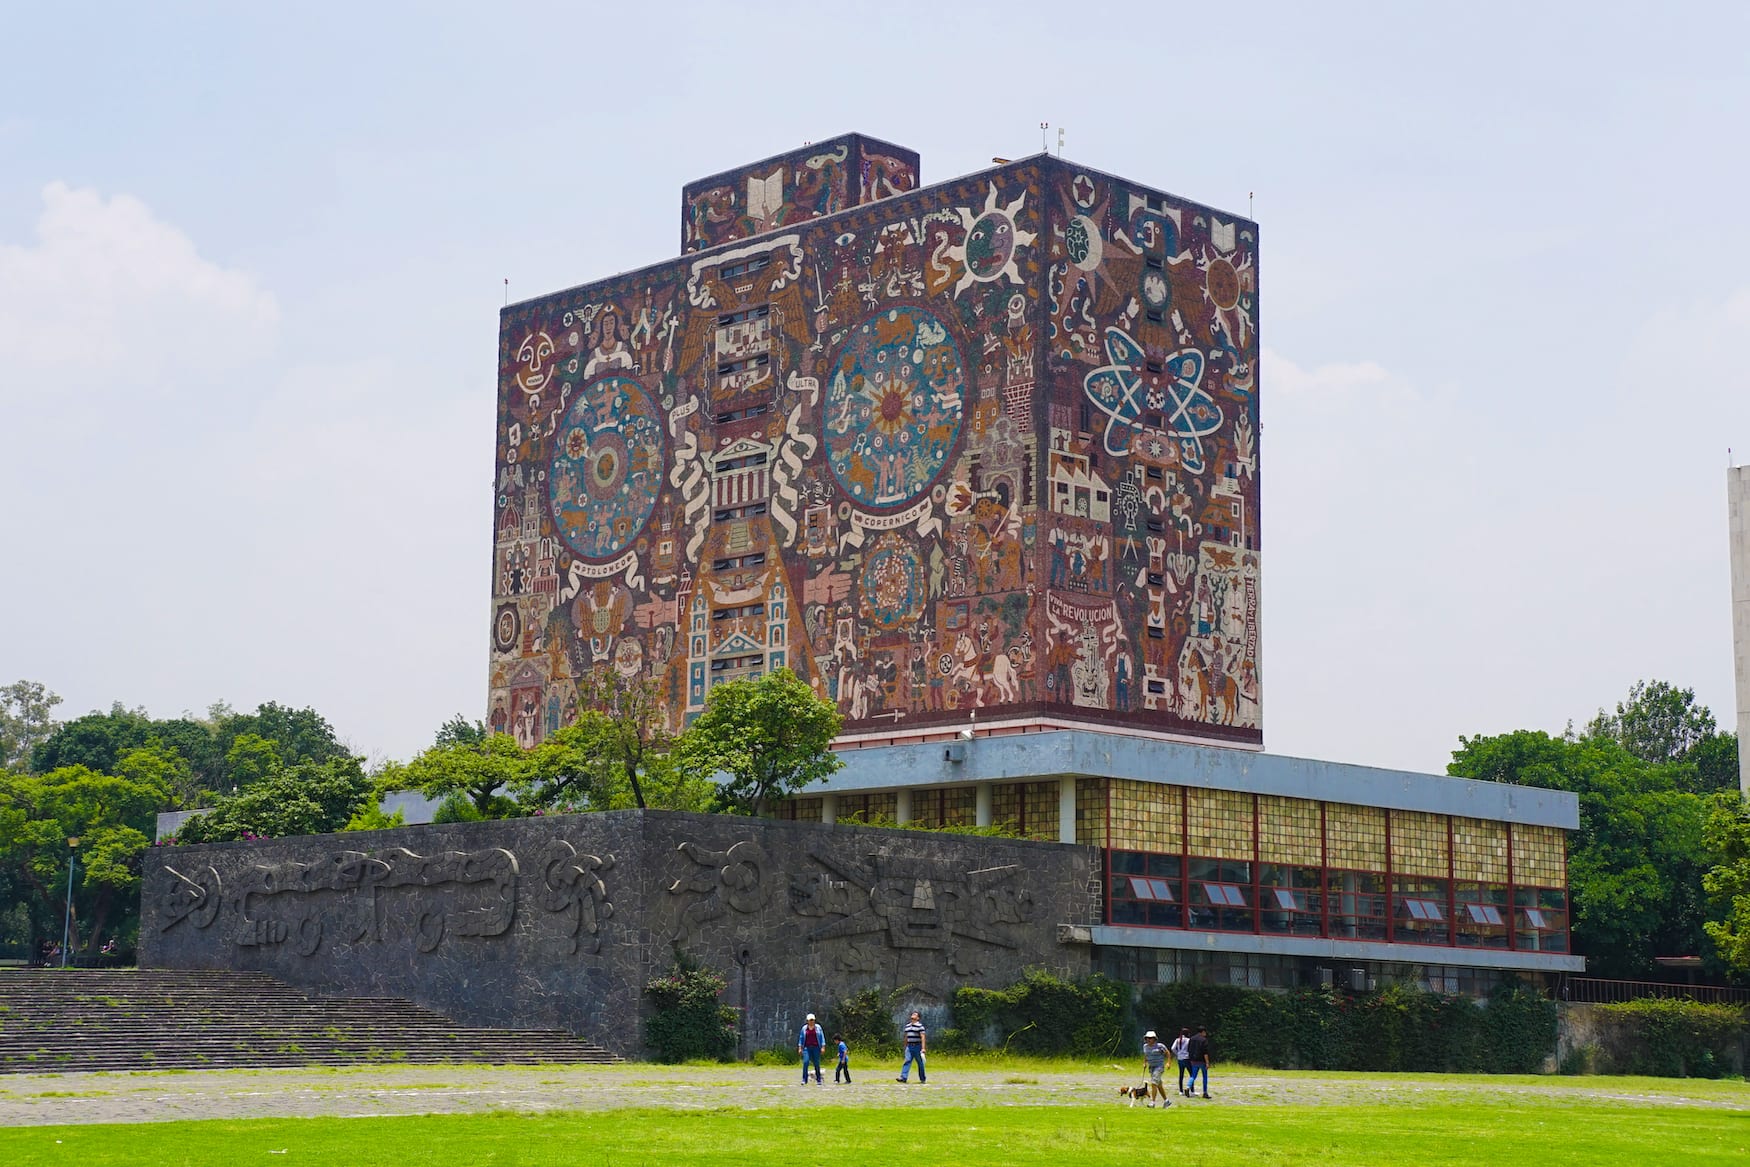 Campus in Mexico City with original street art